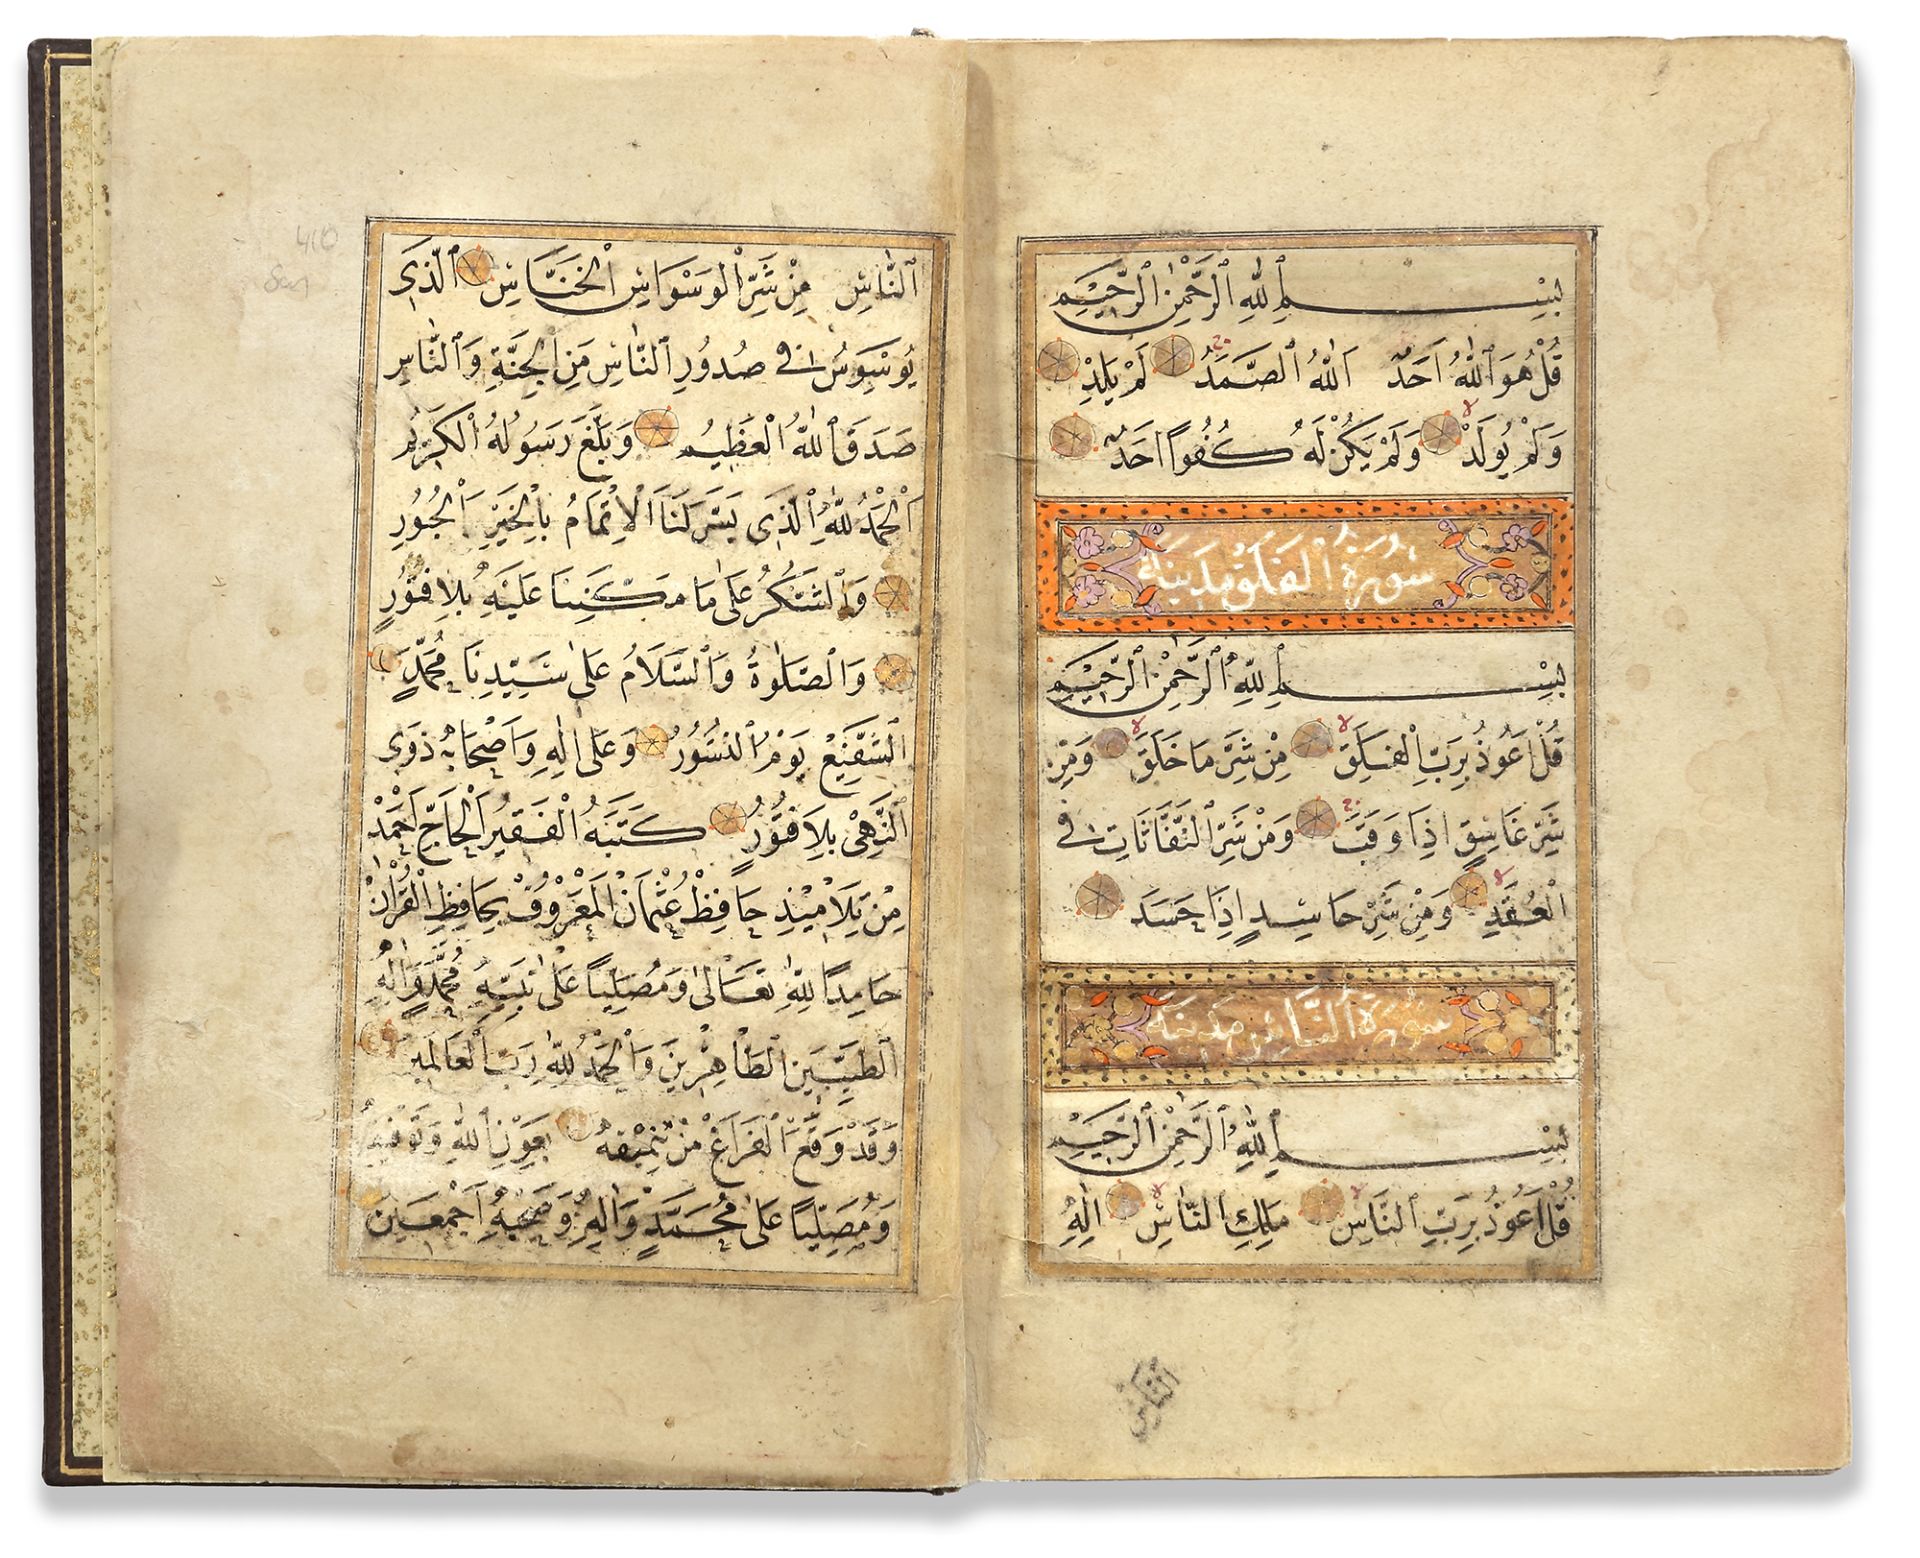 AN ILLUMINATED OTTOMAN QURAN SIGNED BY AHMED STUDENT OF HAFIZ OSMAN, 18TH CENTURY - Image 5 of 7